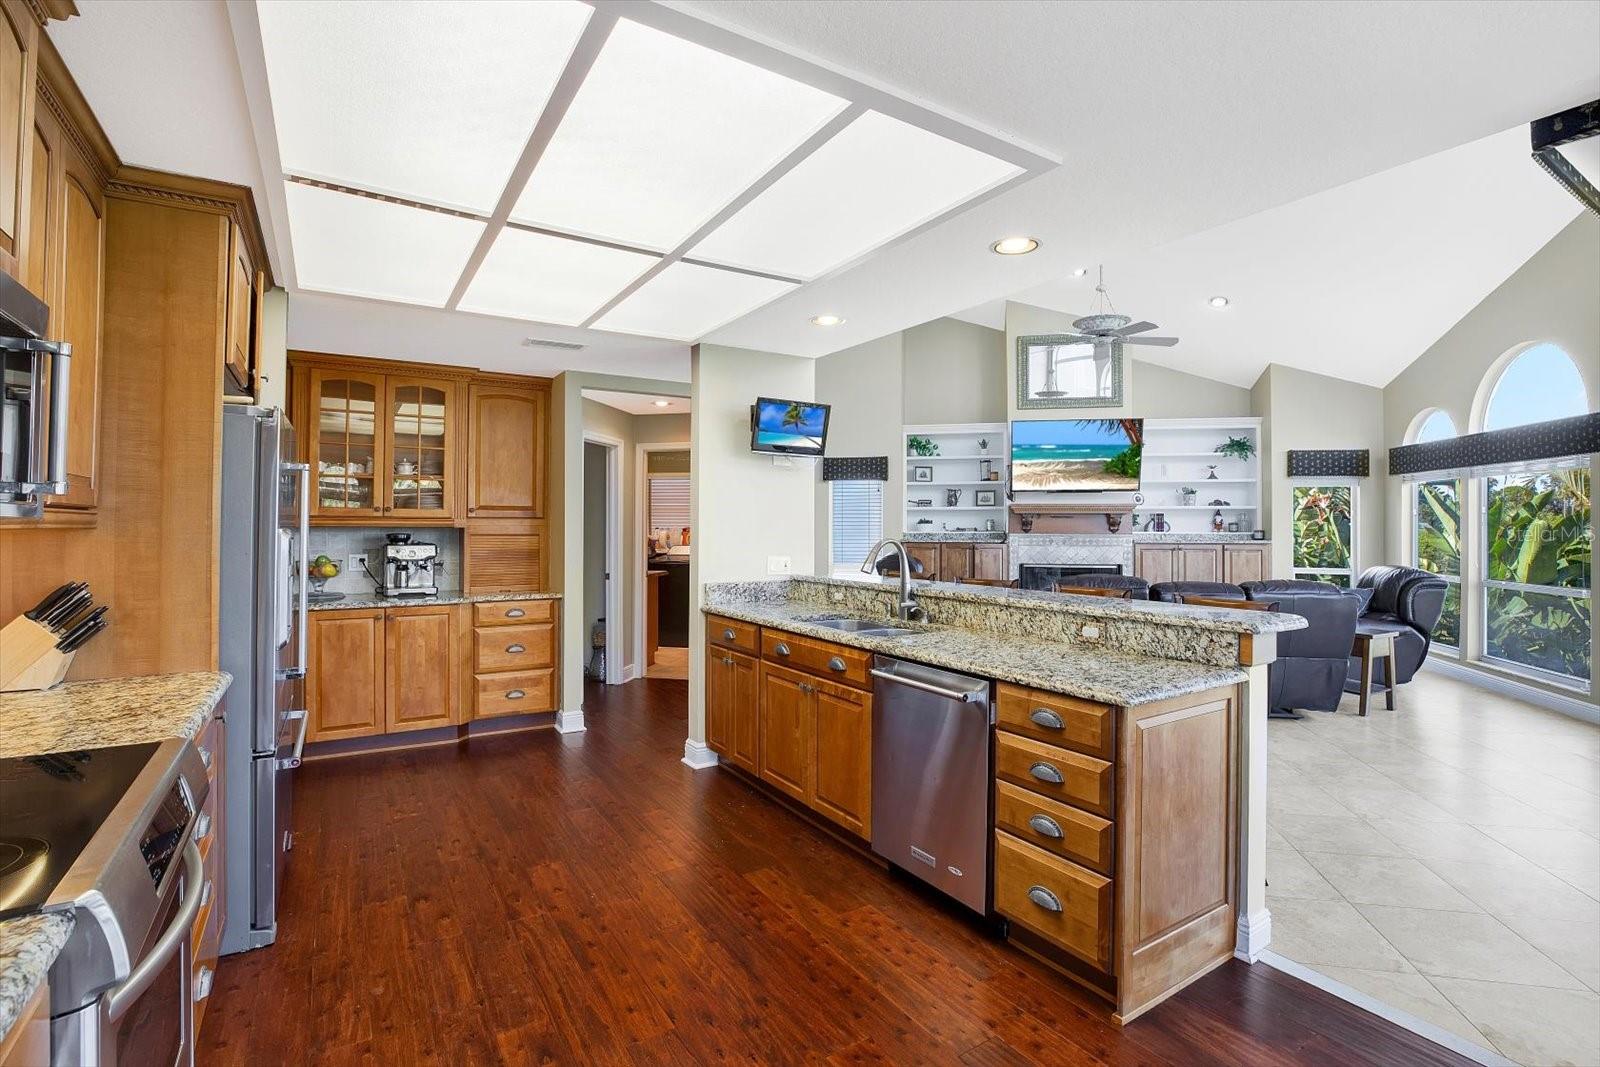 An open kitchen dons wood cabinetry, stainless steel appliances and granite countertops